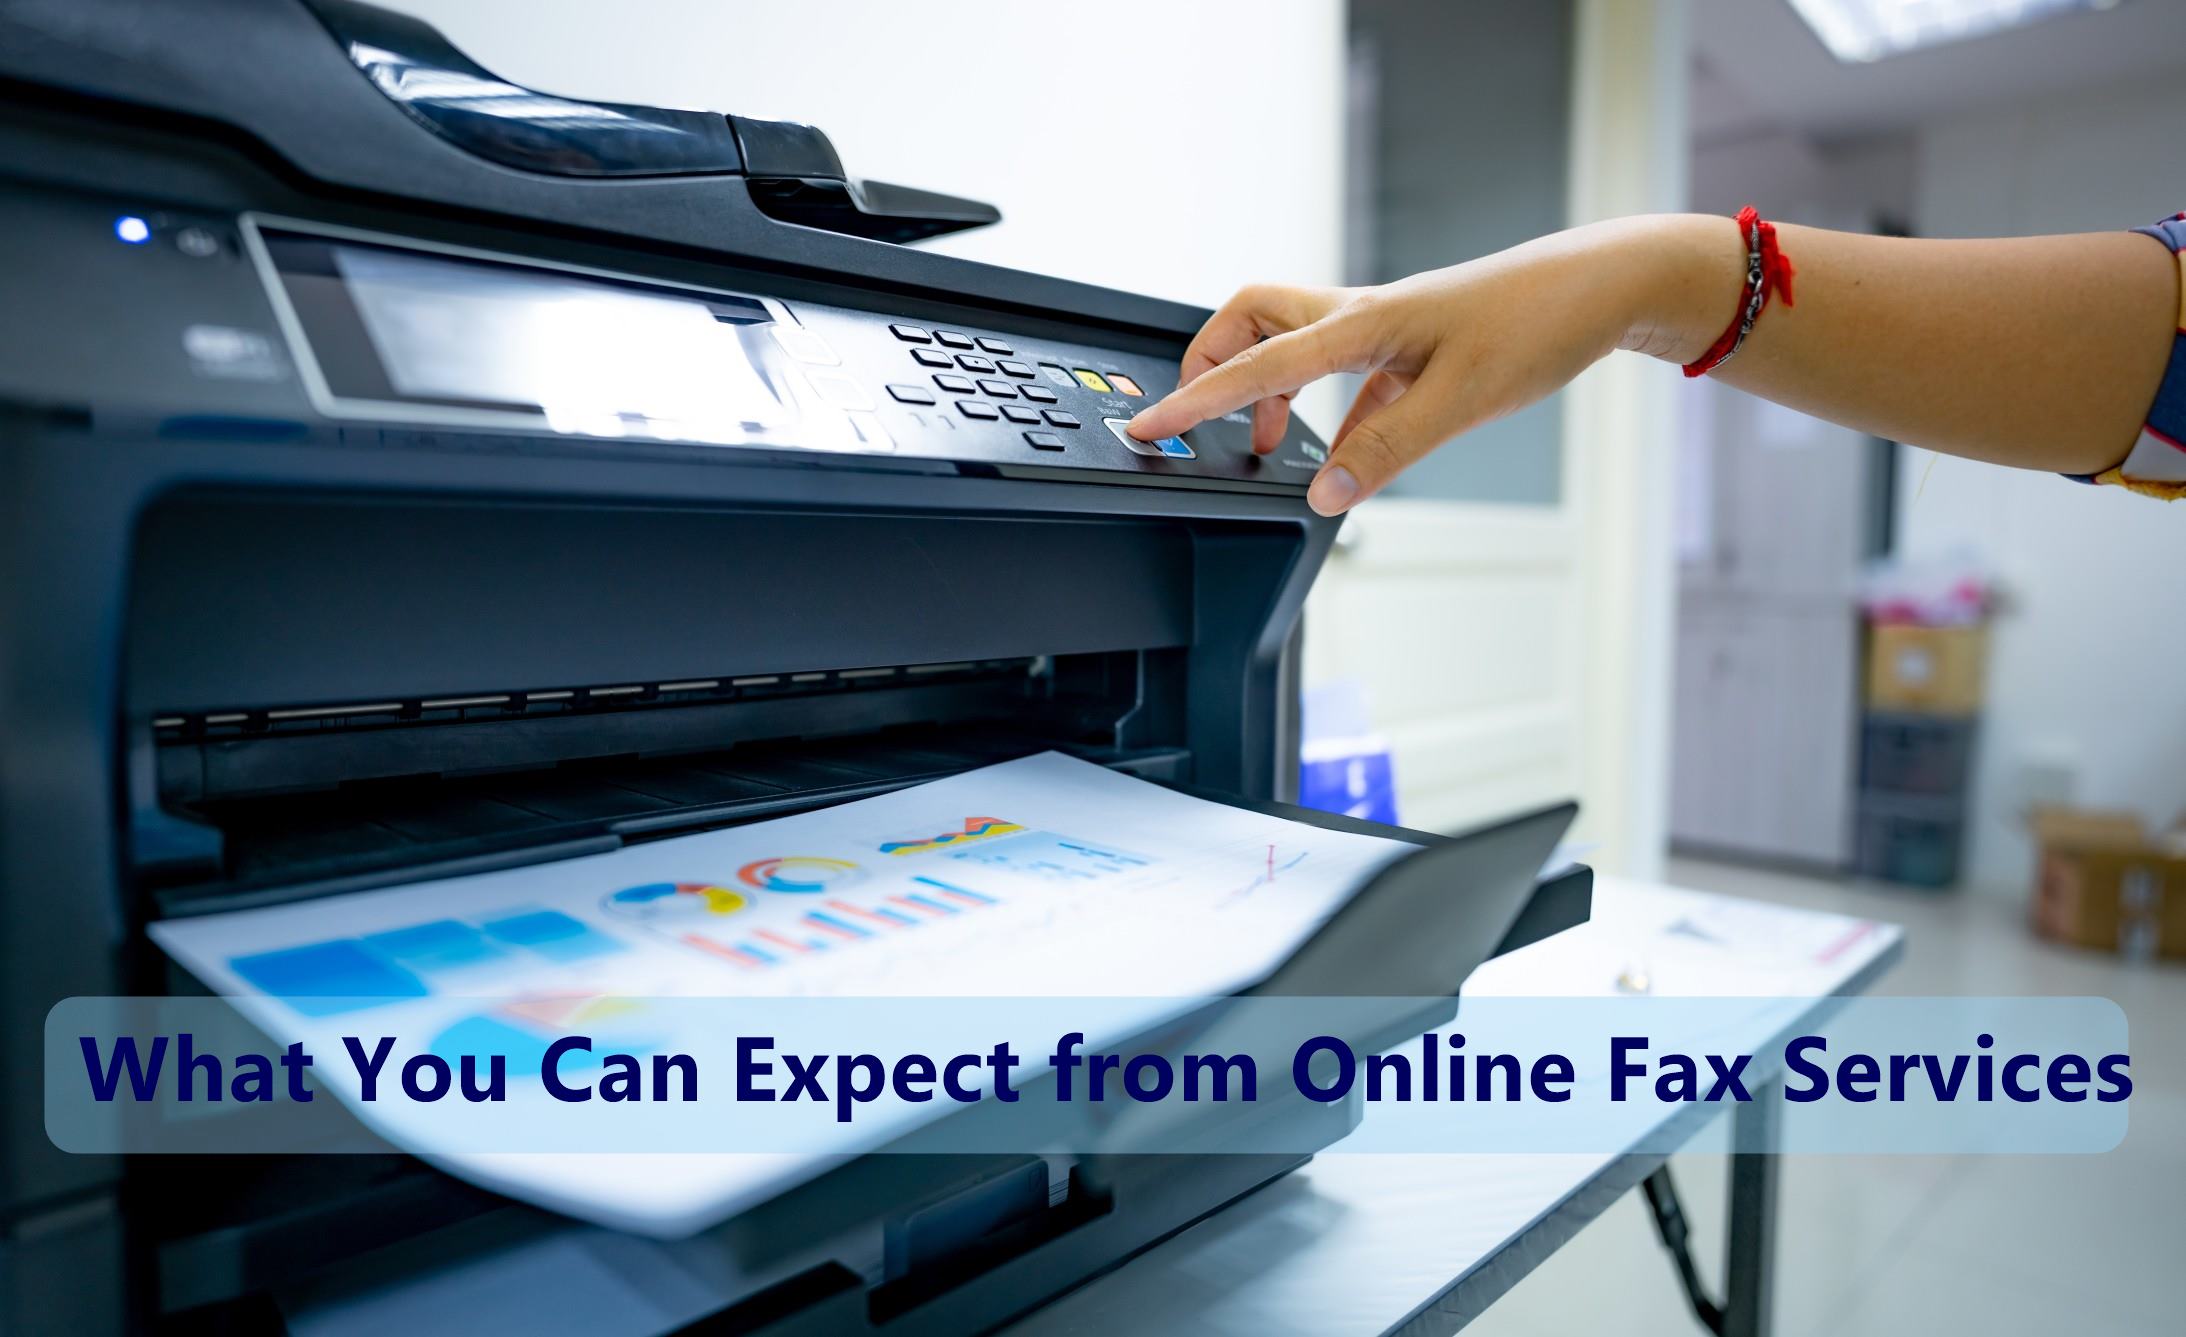 What You Can Expect from Online Fax Services